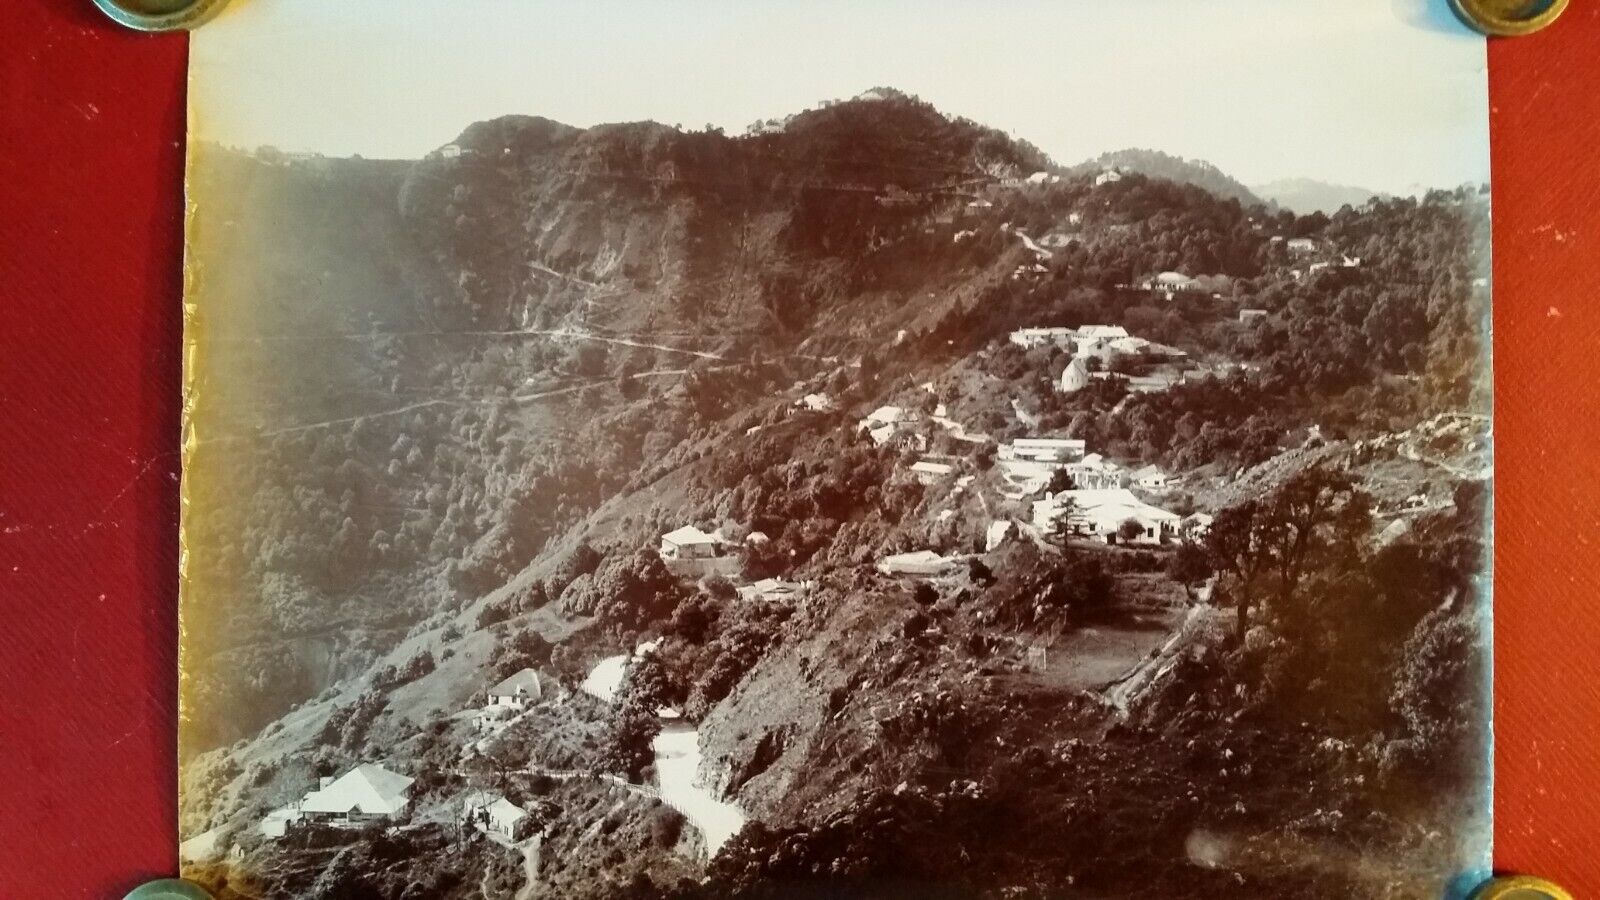 1890 ORIGINAL LARGE ANTIQUE PHOTOGRAPH - VIEW OF MUSSOORIE INDIA - S H DAGG